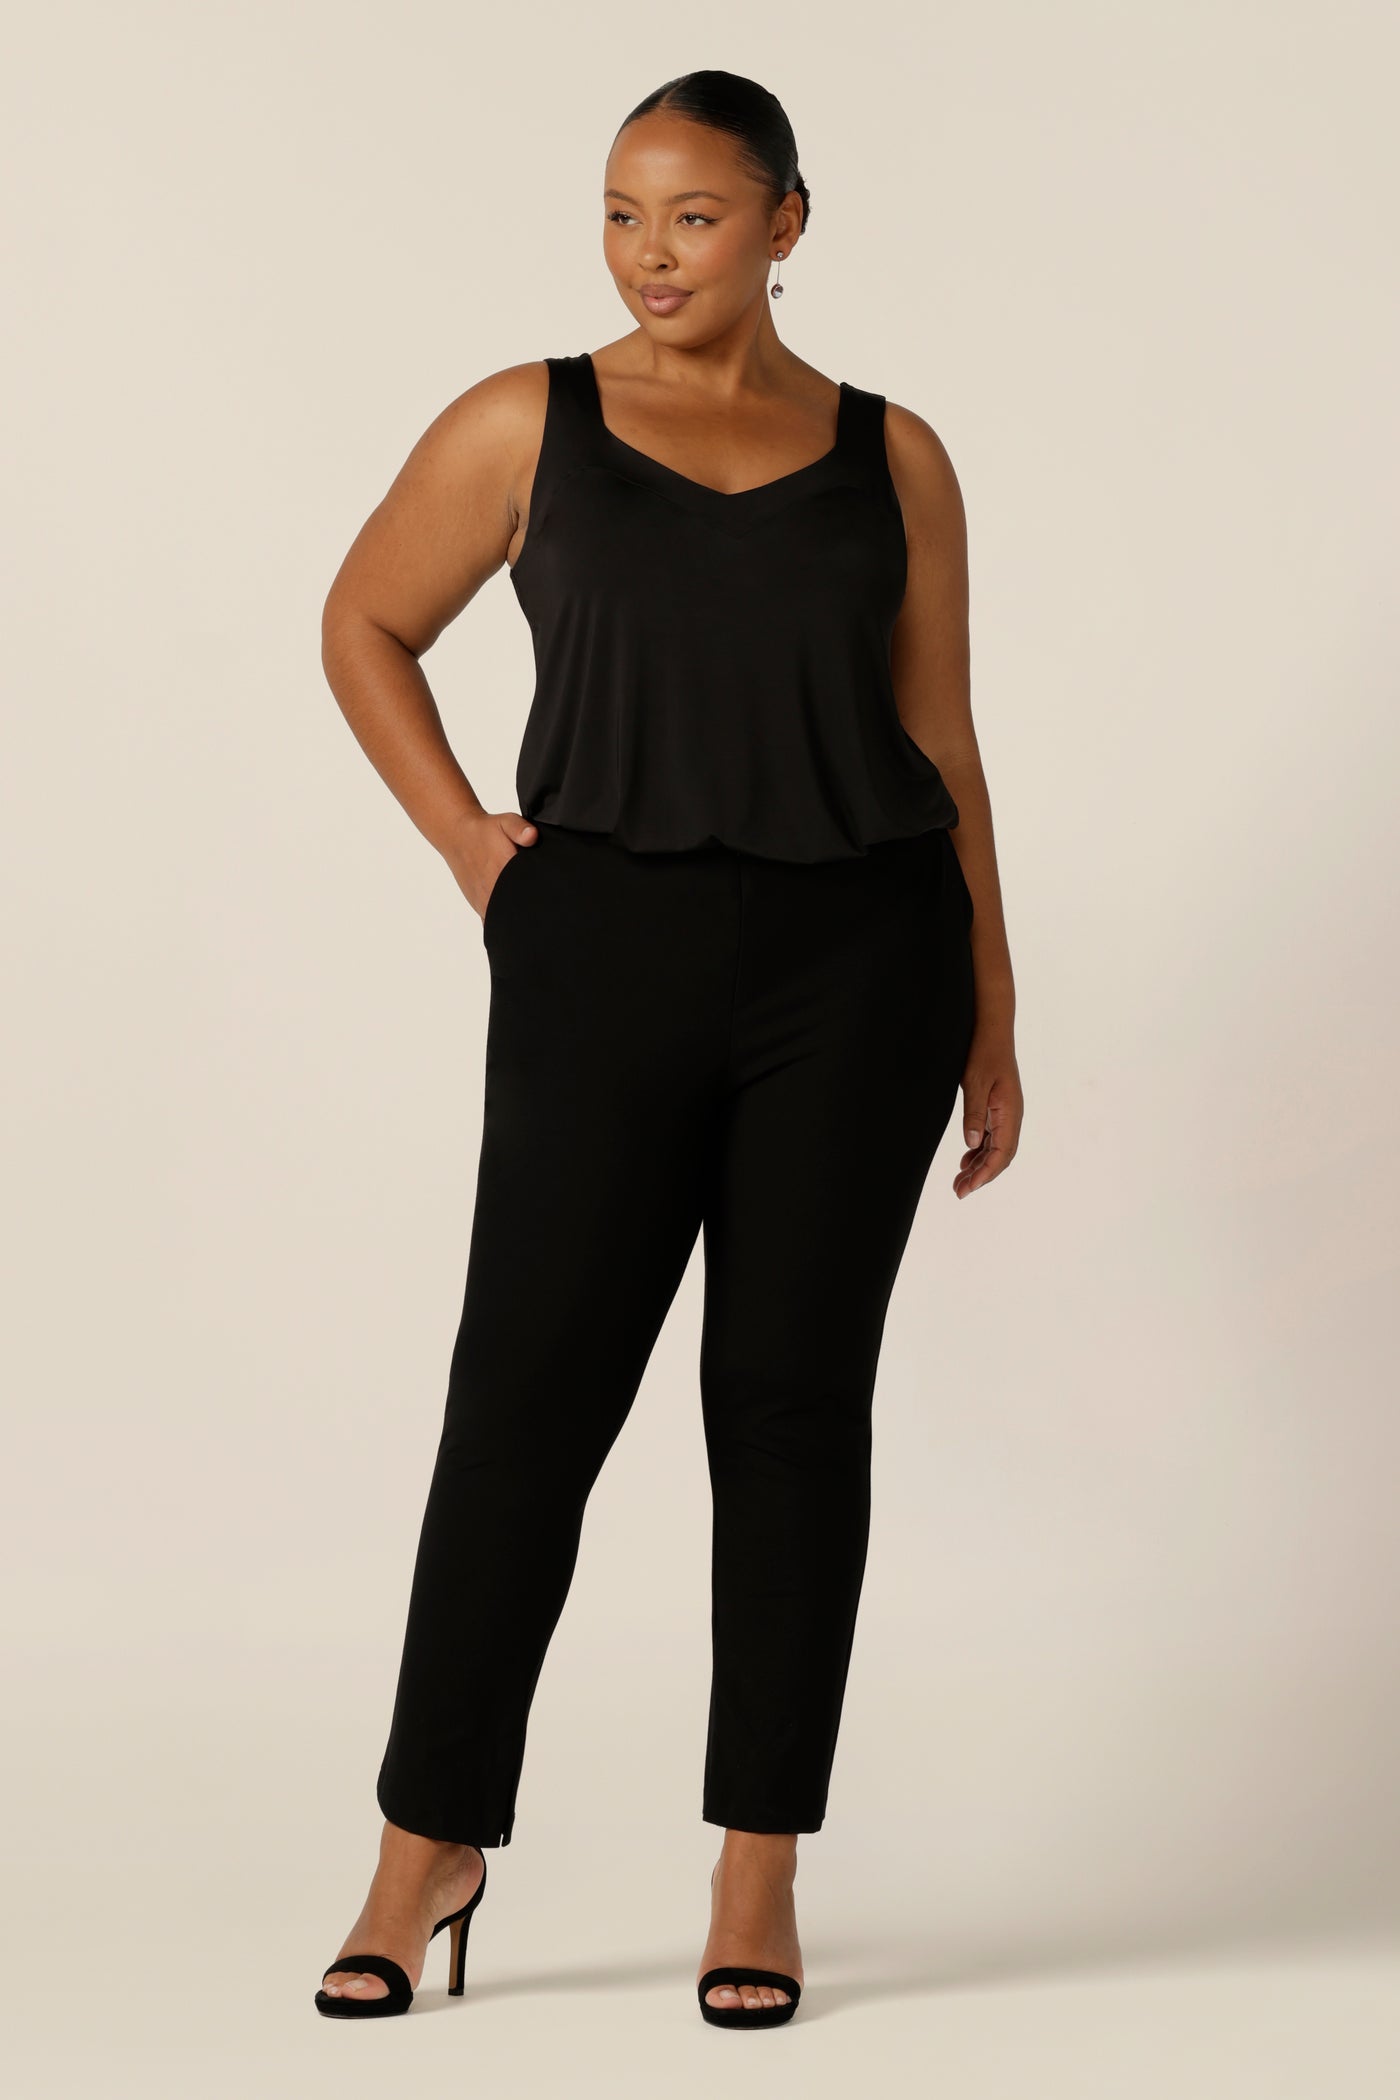 A size 18, fuller figure woman wears a black cami top with wide shoulder straps. Made in Australia by Australian and New Zealand women's clothing company, this slinky jersey top wears well with evening and occasionwear skirts, pants and suit jackets.